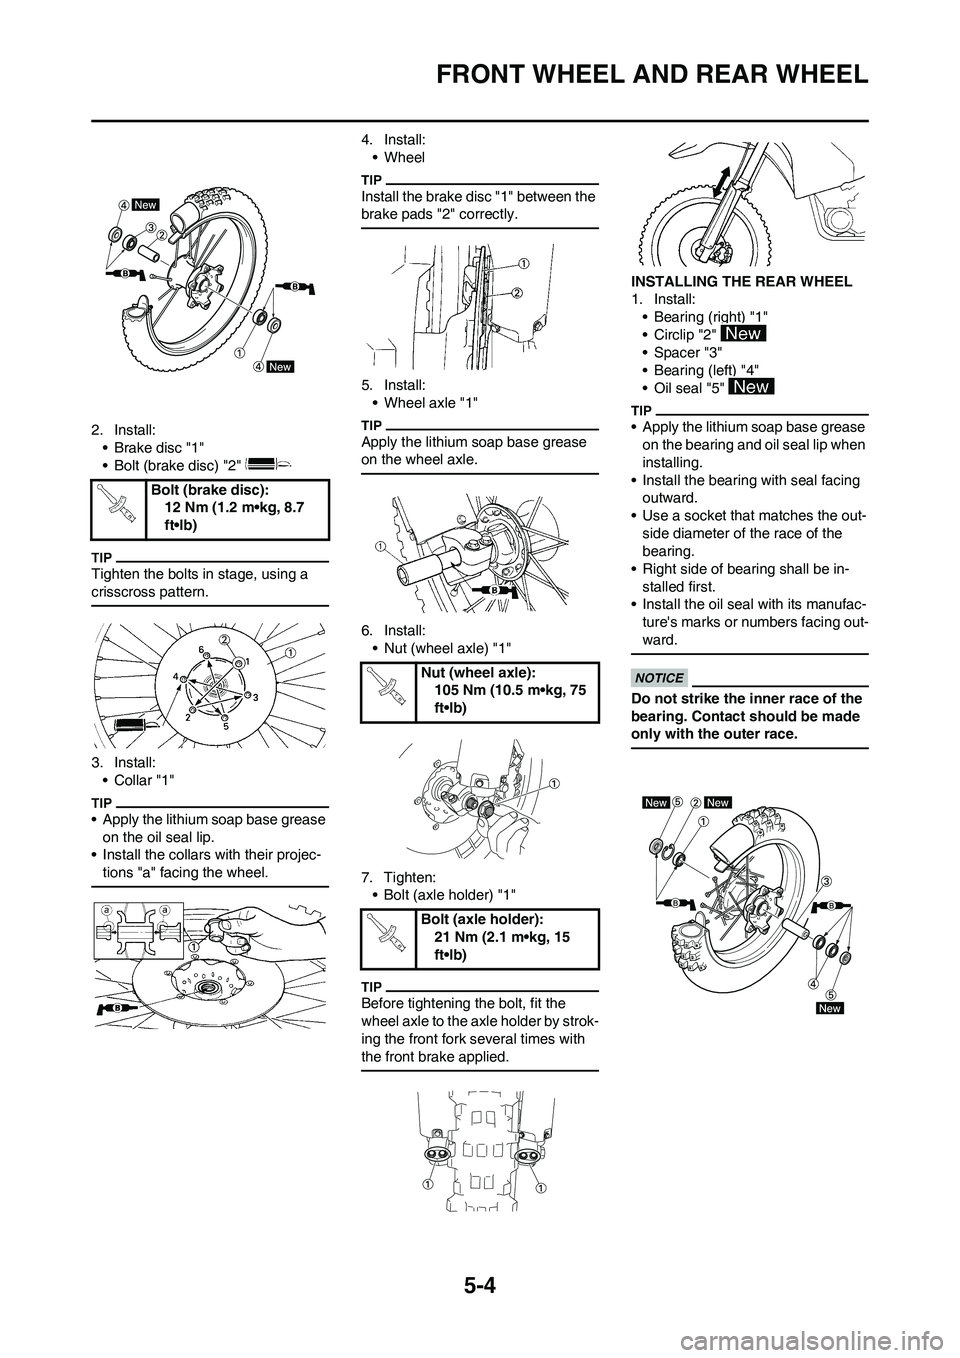 YAMAHA YZ450F 2010  Owners Manual 5-4
FRONT WHEEL AND REAR WHEEL
2. Install:
• Brake disc "1"
• Bolt (brake disc) "2" 
Tighten the bolts in stage, using a 
crisscross pattern.
3. Install:
•Collar "1"
• Apply the lithium soap b